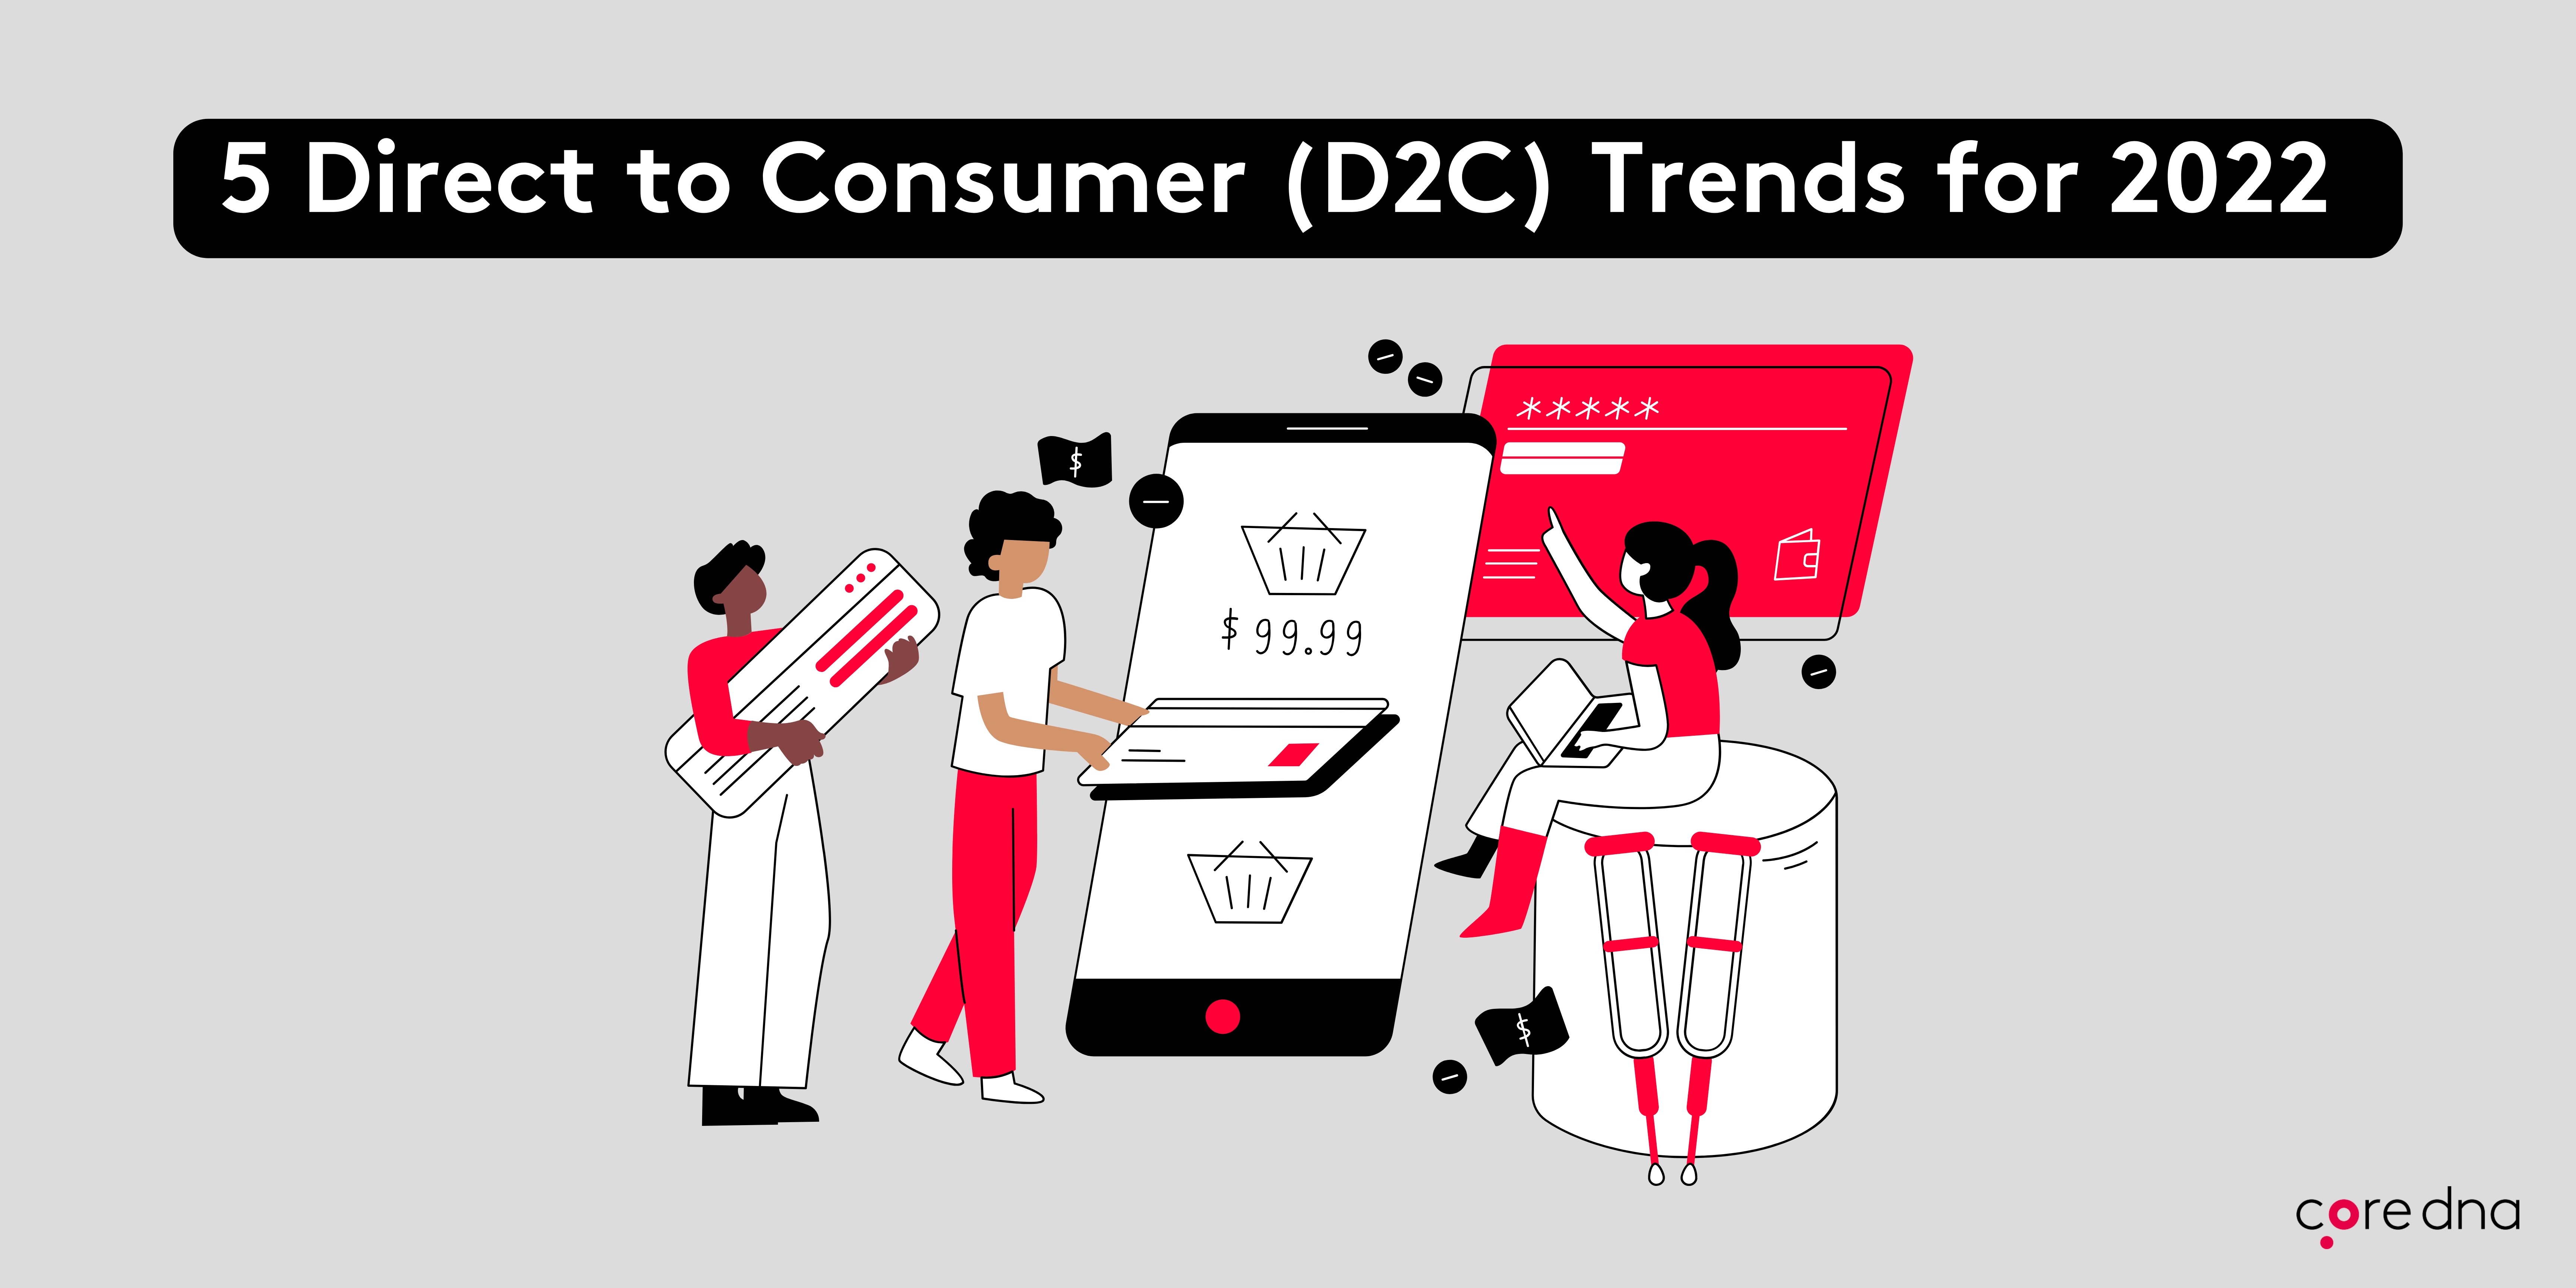 5 Direct to Consumer (D2C) Trends for 2022 Core dna